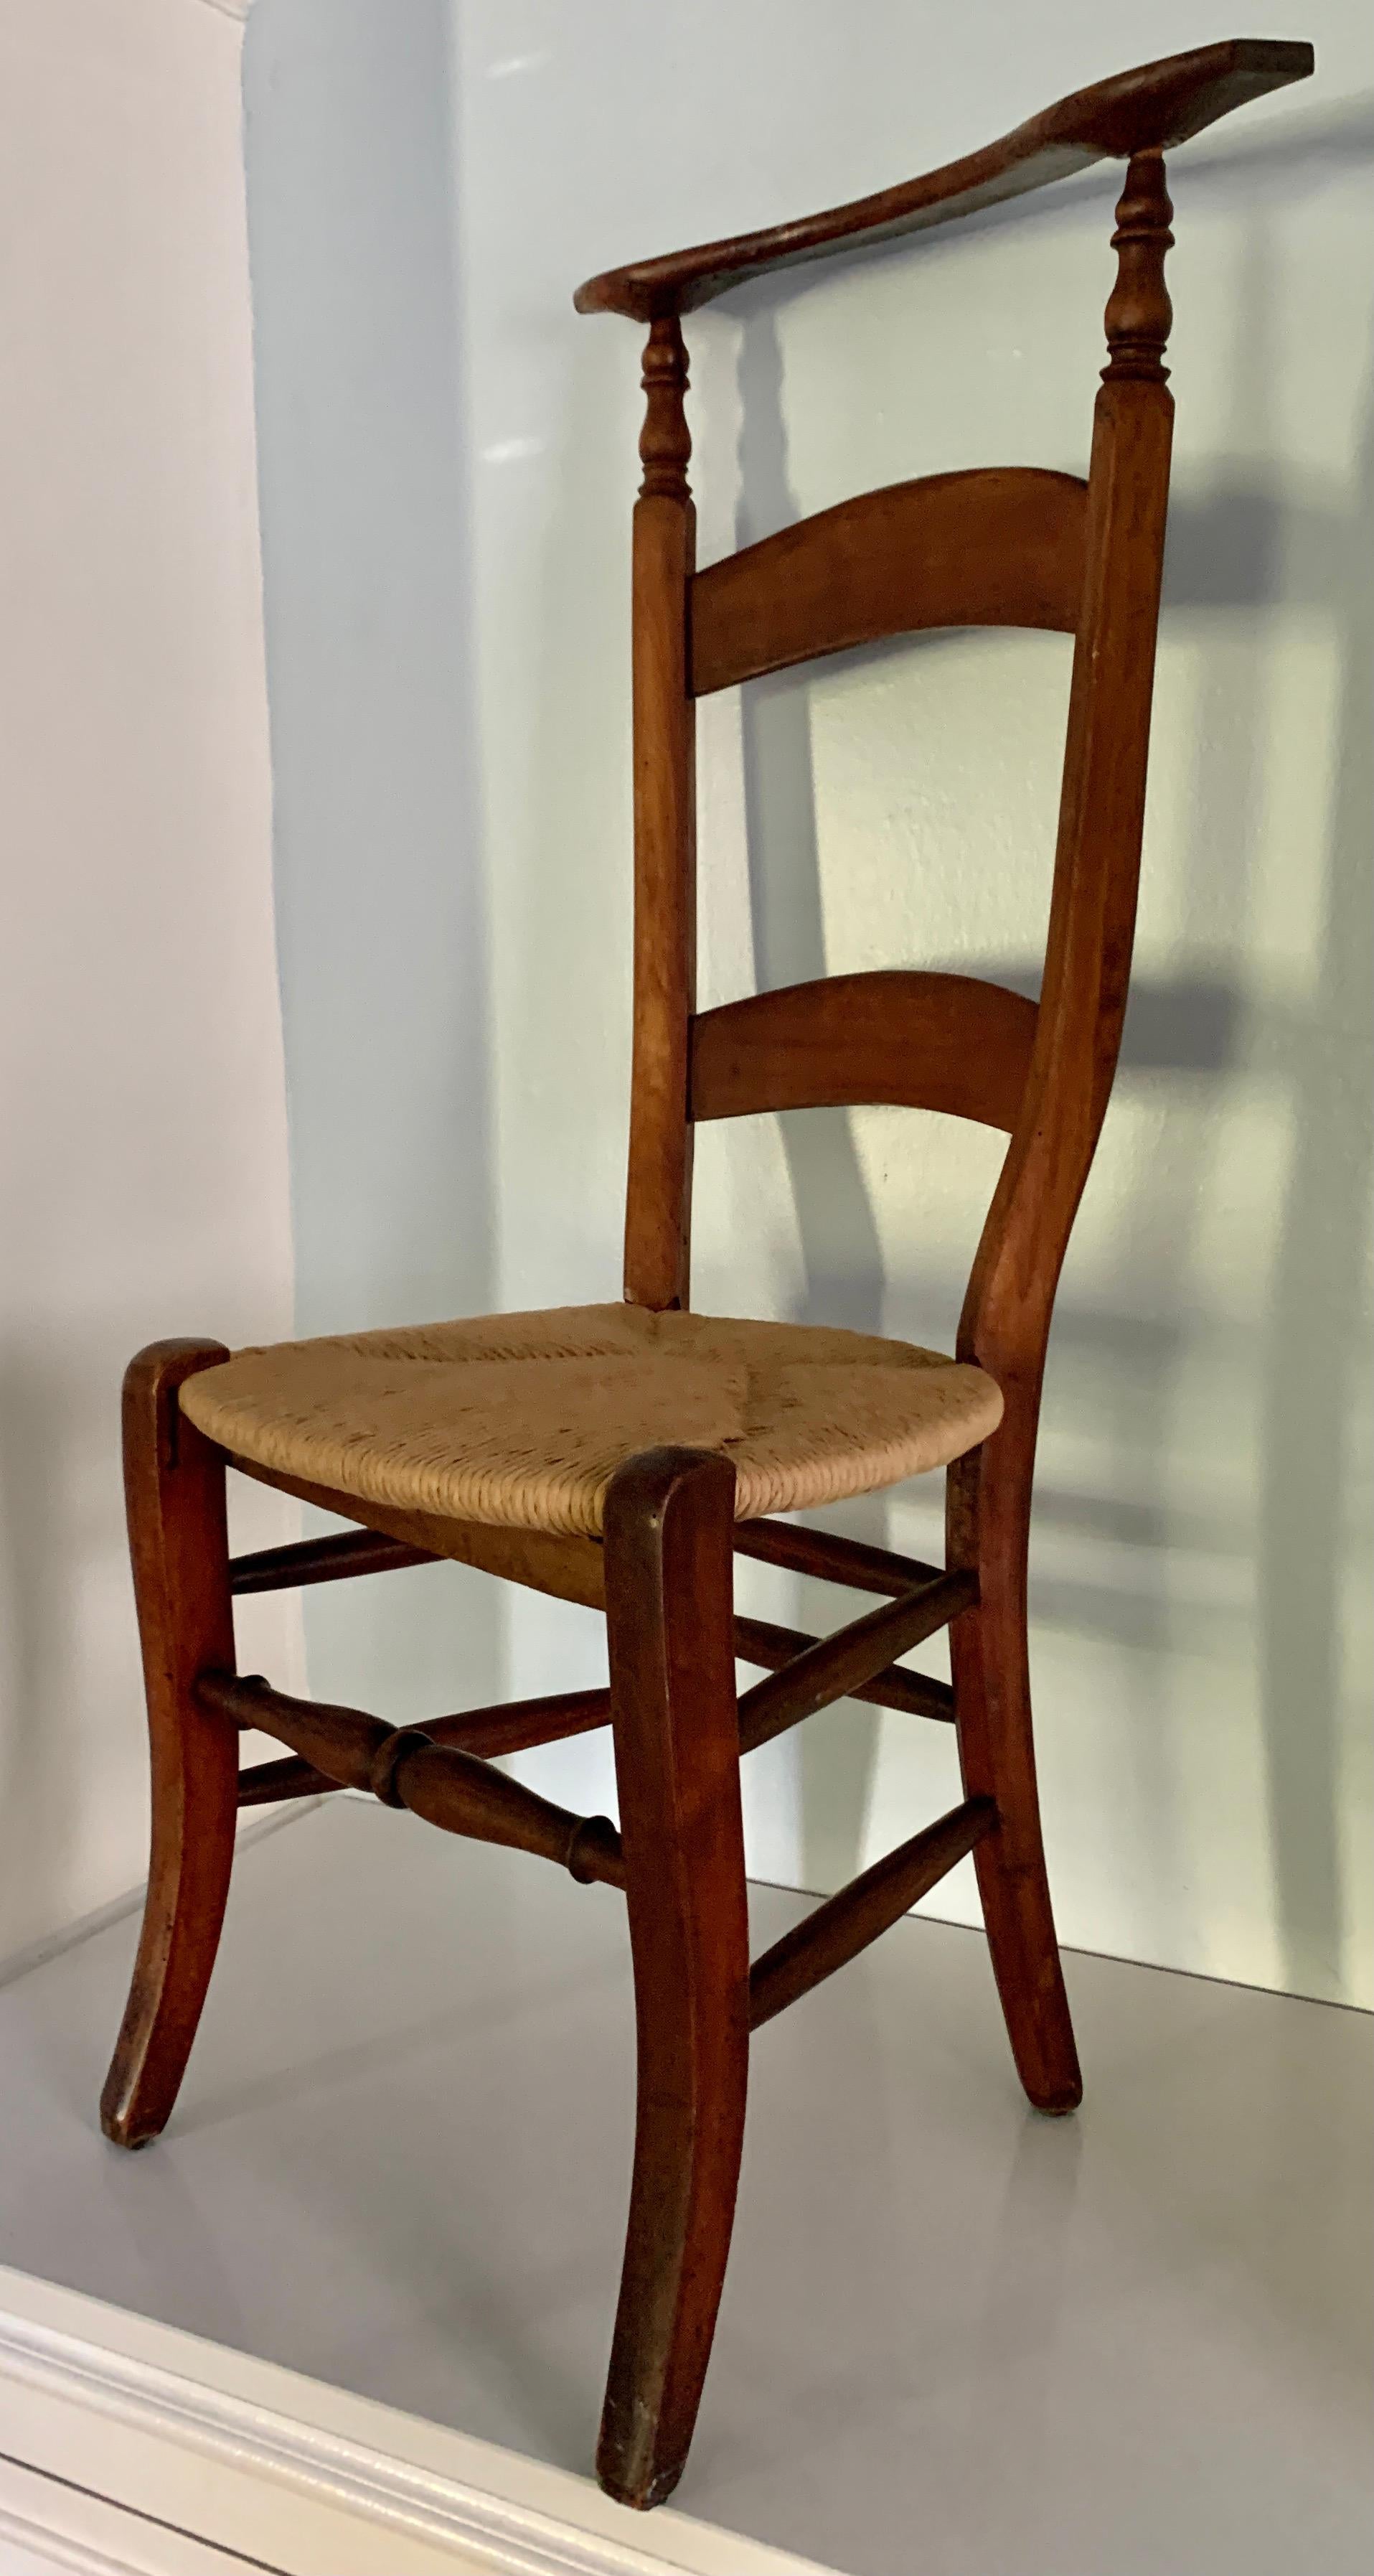 19th Century 19th C. Prie Dieu Chair For Sale